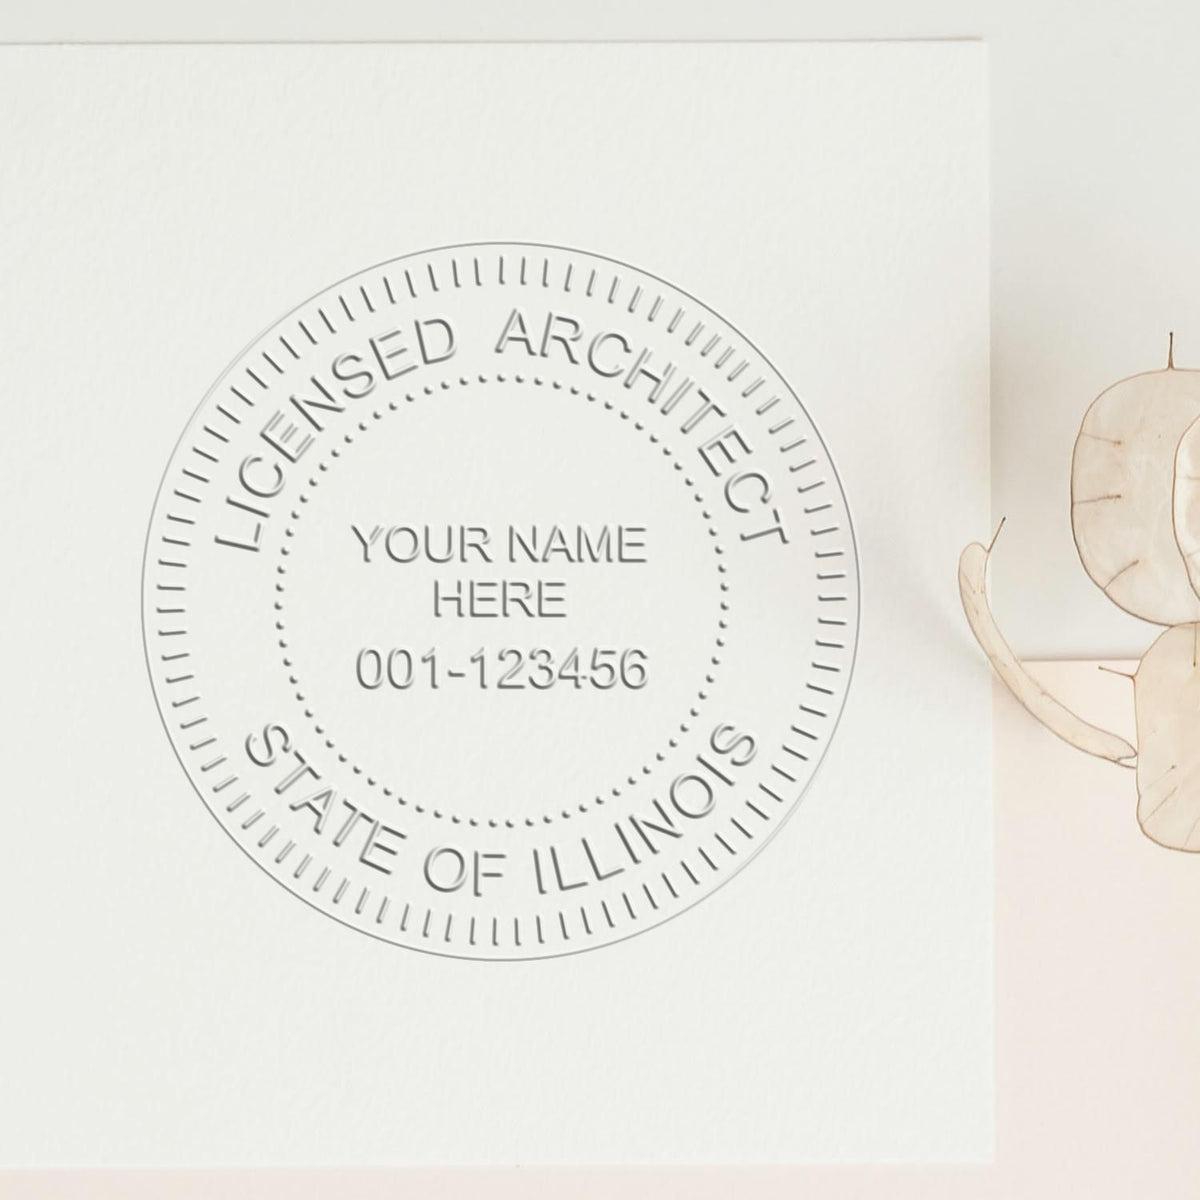 The State of Illinois Long Reach Architectural Embossing Seal stamp impression comes to life with a crisp, detailed photo on paper - showcasing true professional quality.